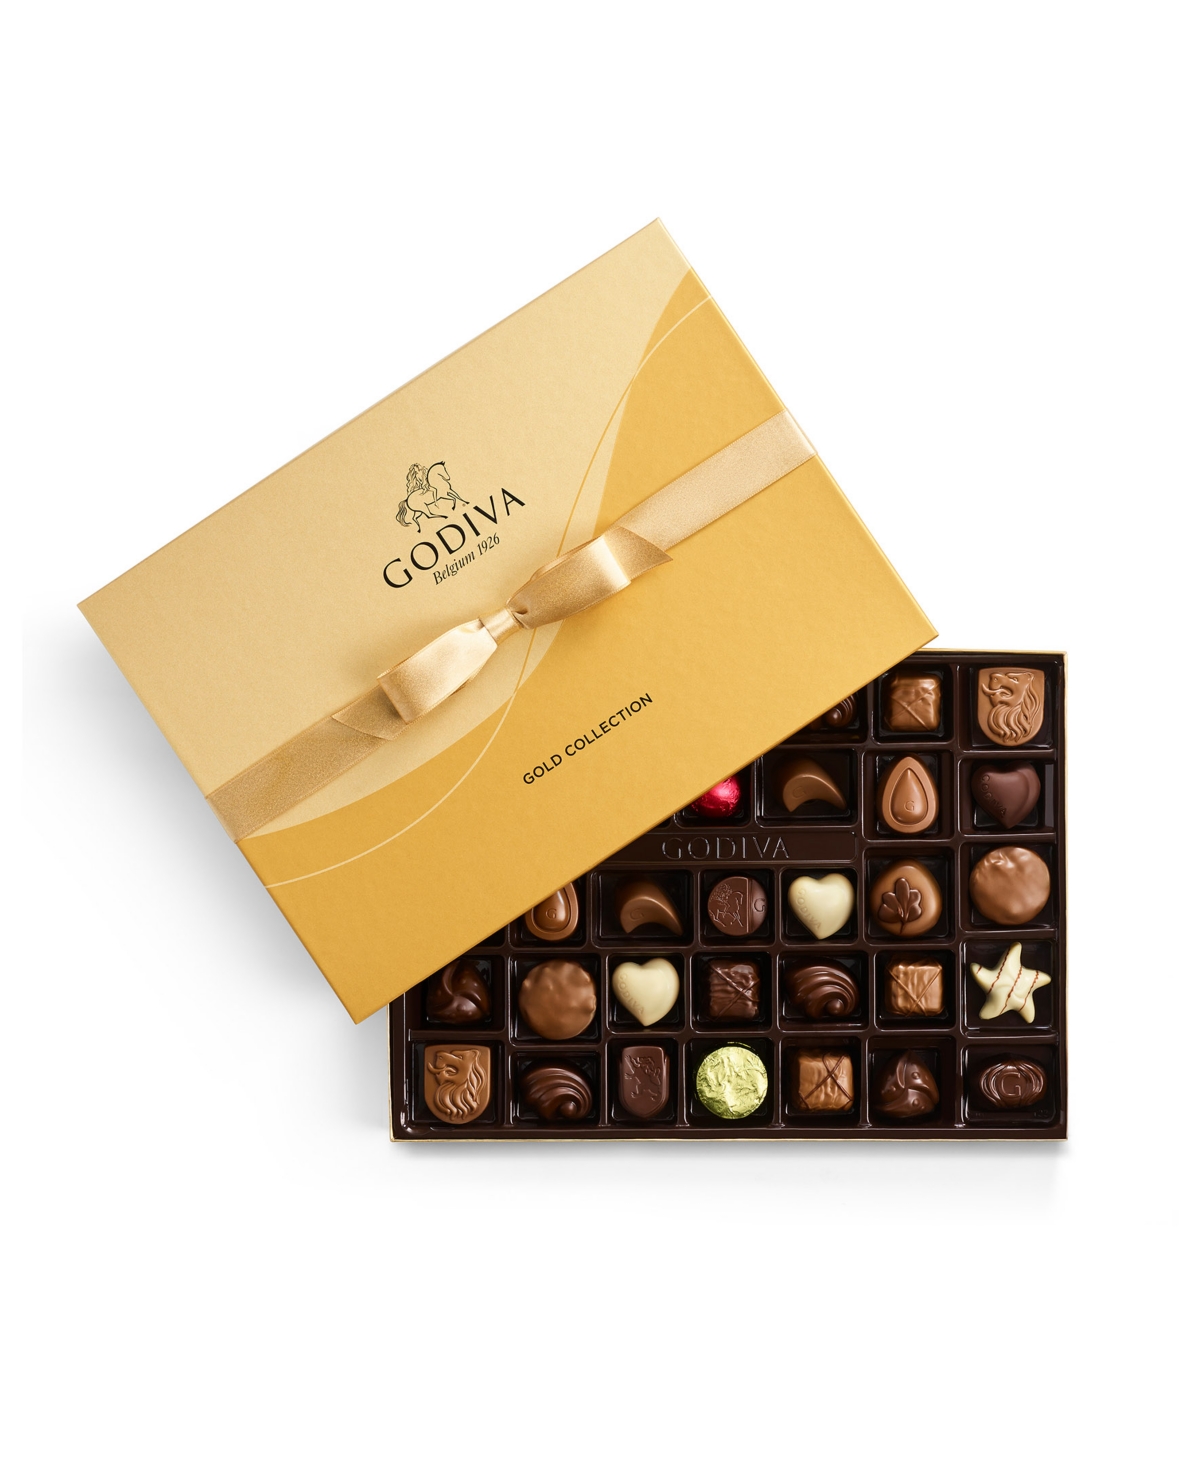 Godiva Assorted Chocolate Gold-tone Gift Box, 36 Piece In No Color